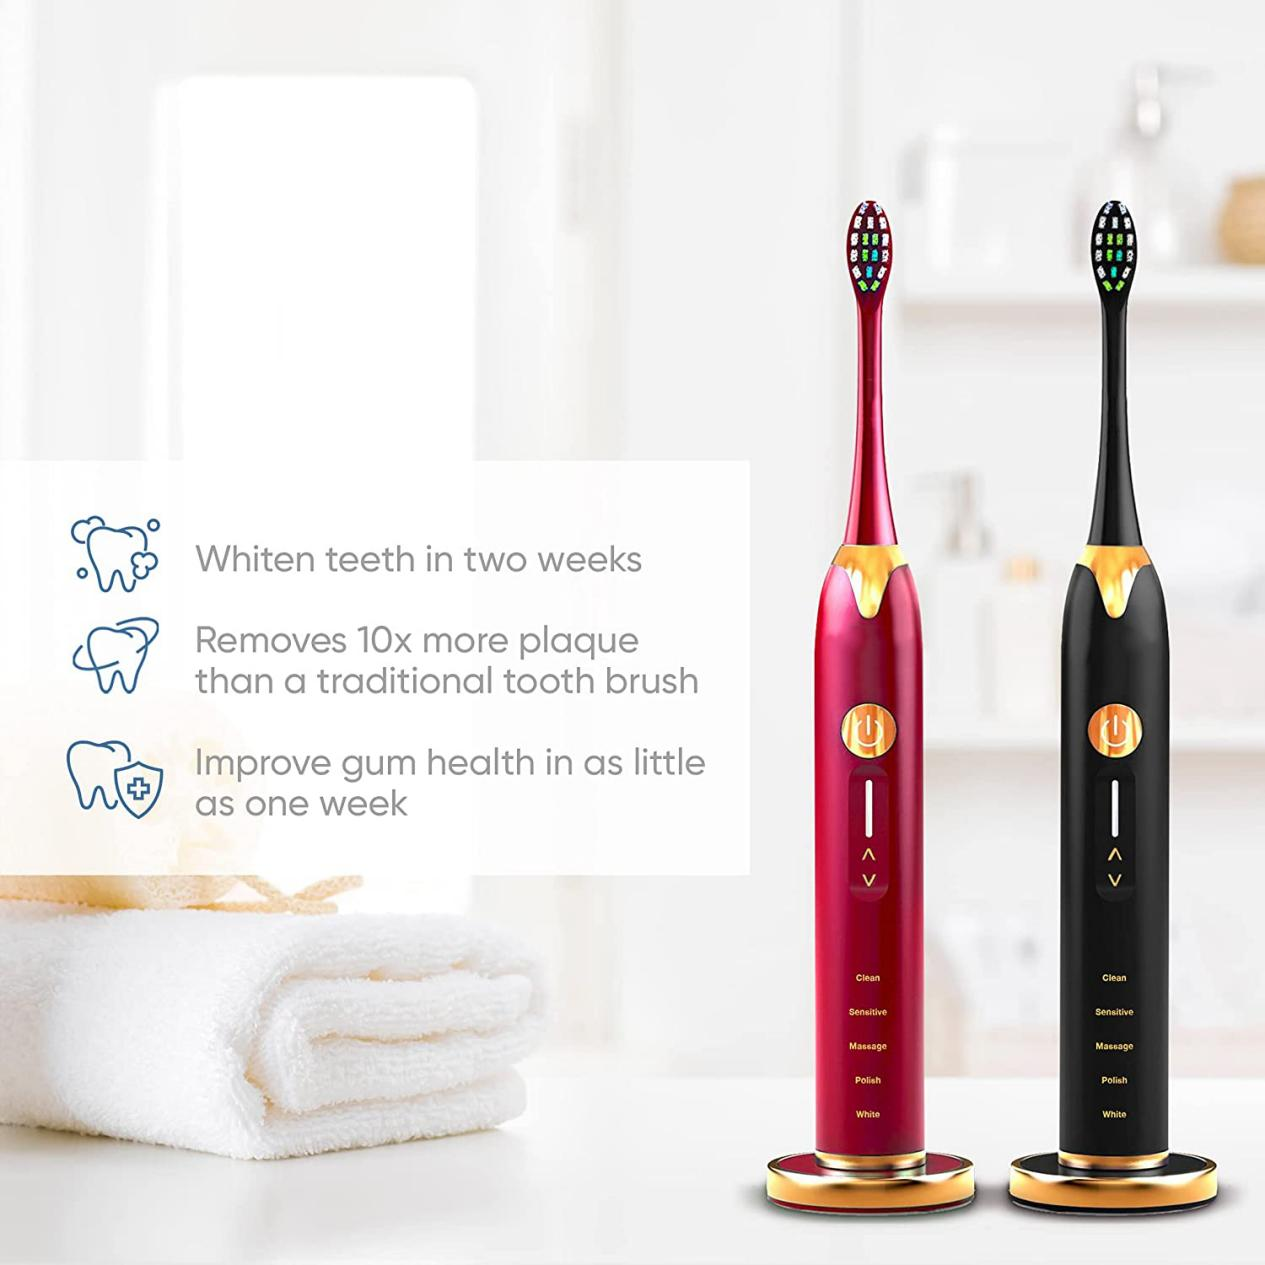 How long do electric toothbrushes last?